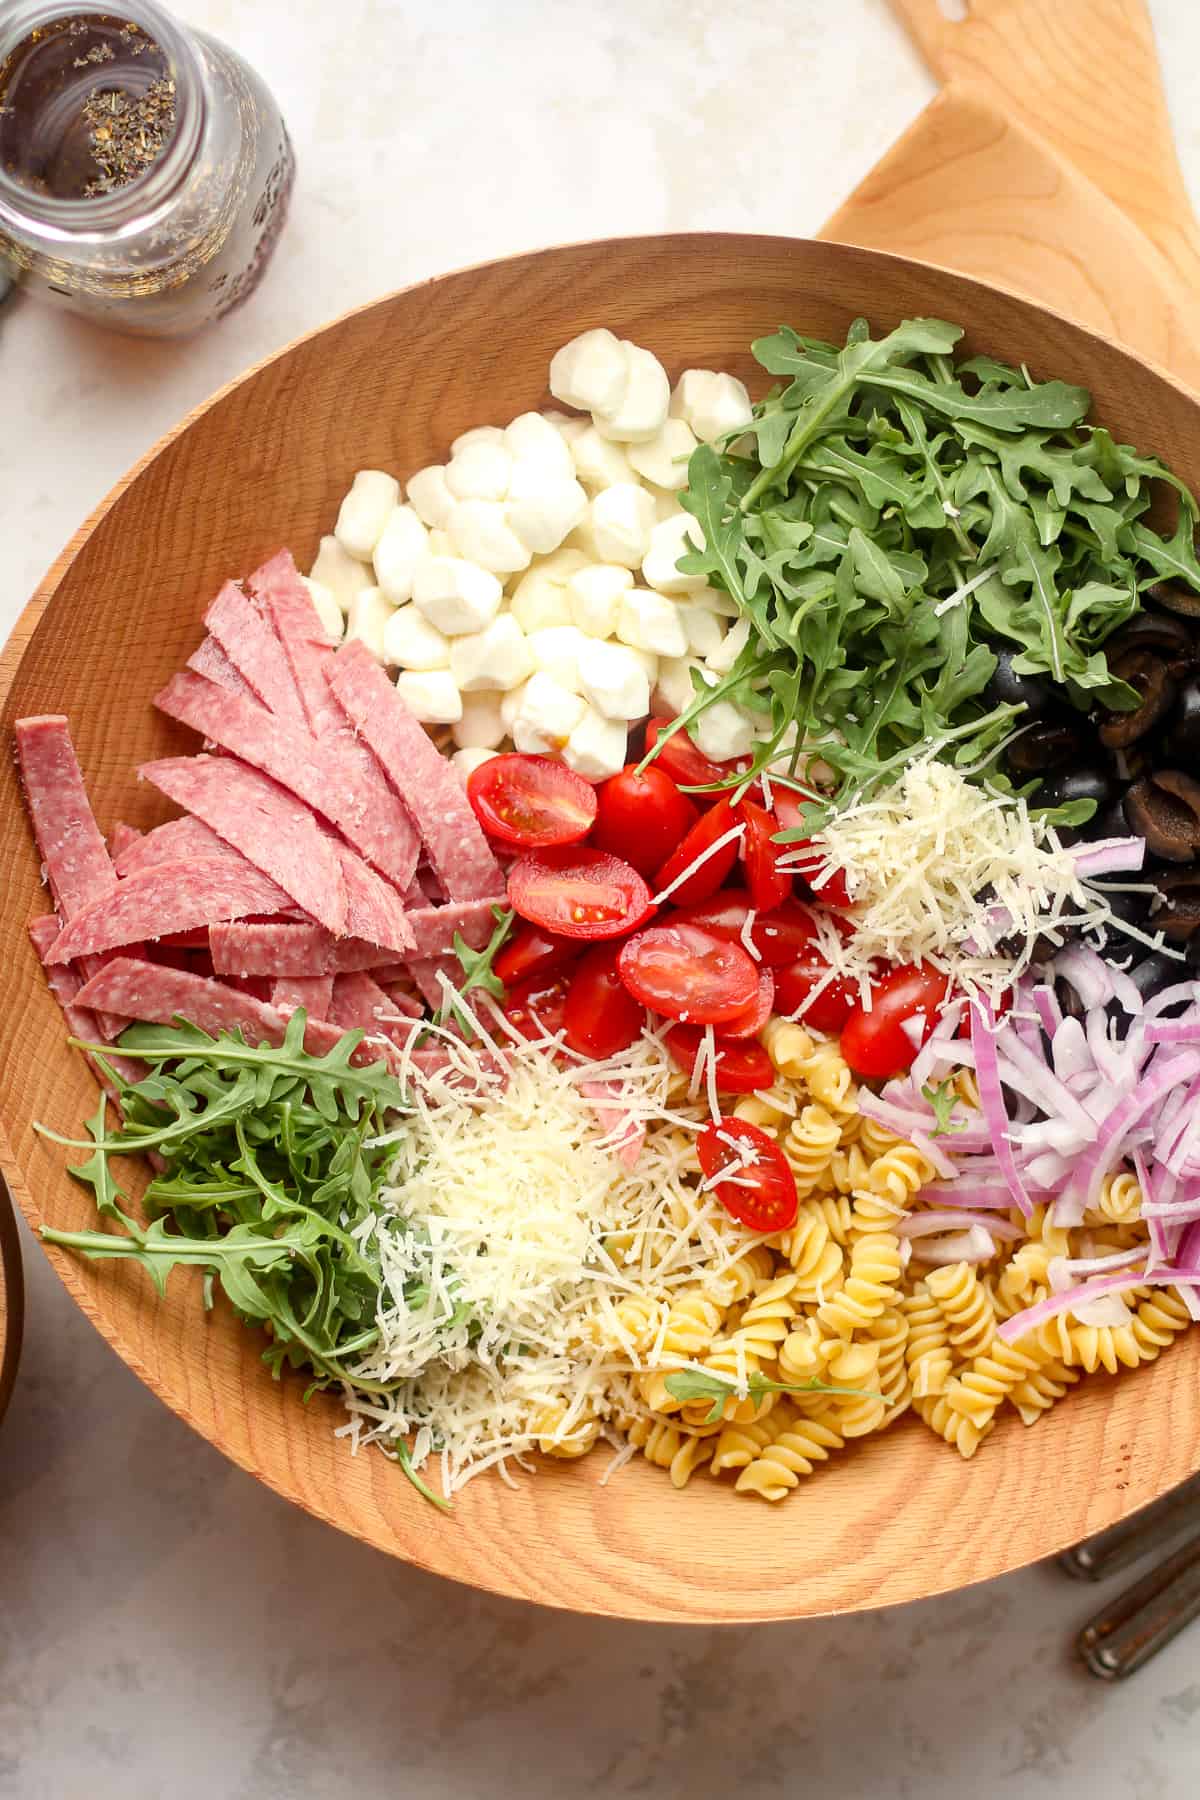 A bowl of the pasta salad ingredients.